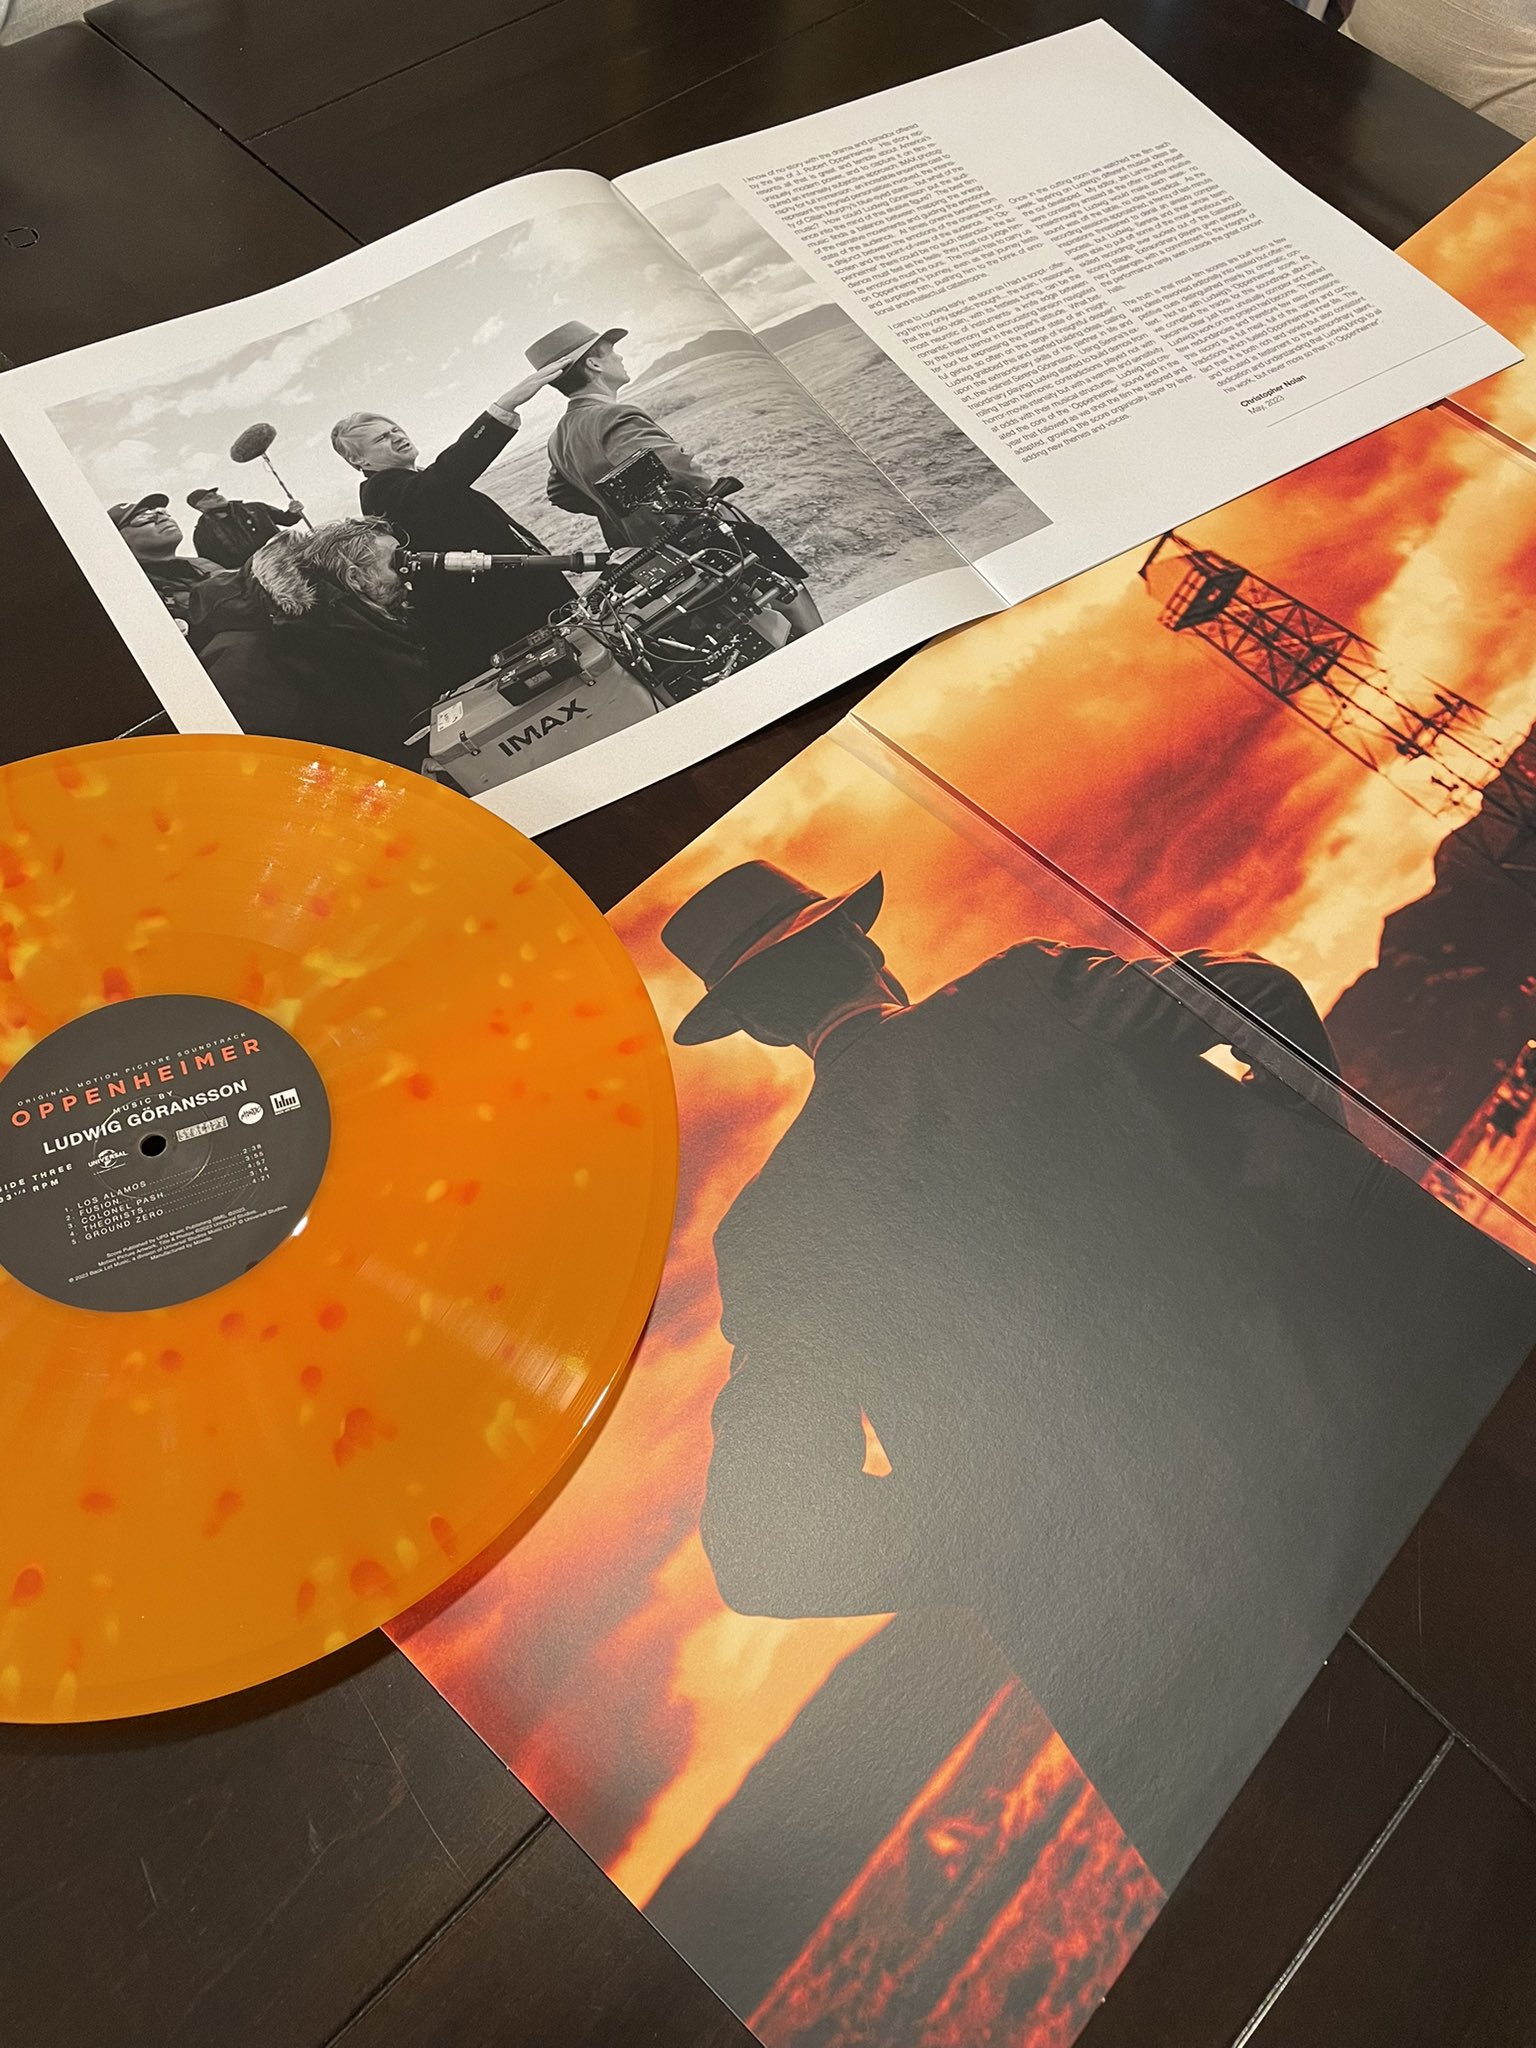 Courtney Howard on X: Though I'd already purchased the @MondoNews vinyl  months ago, it was nice of Universal to send another over in their # Oppenheimer FYC package. Ludwig Göransson's score is 1